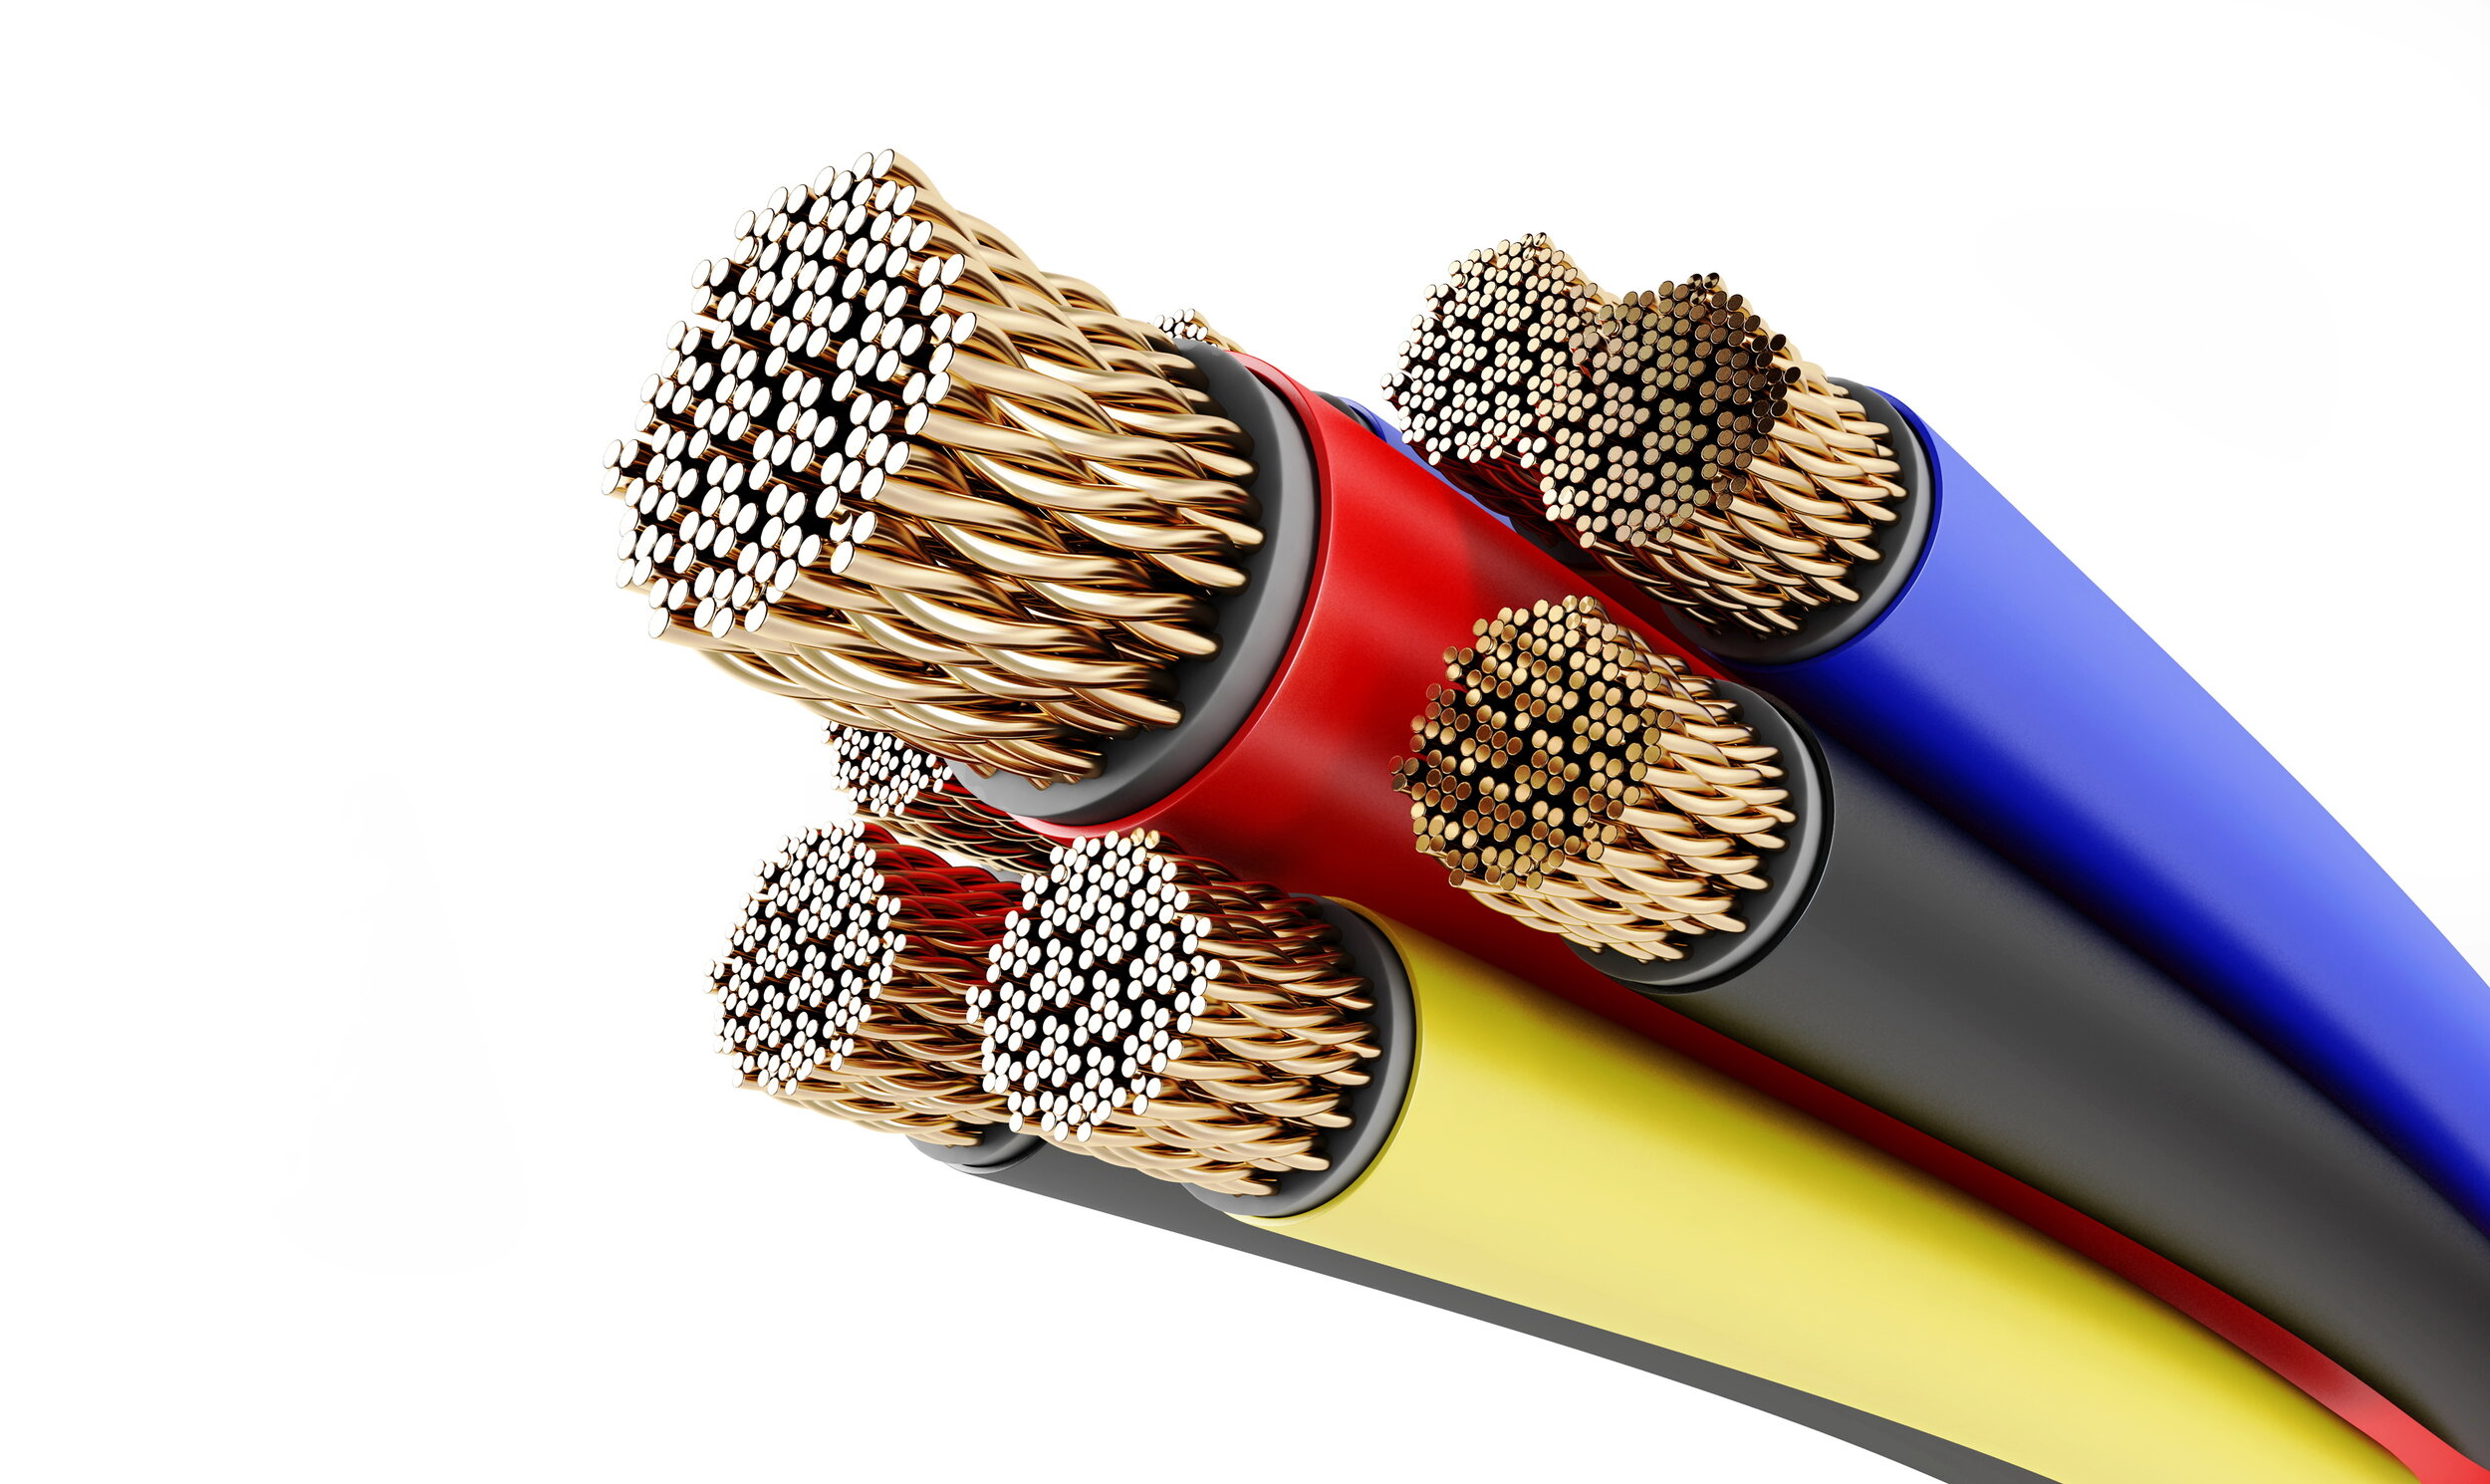 Colorful-tubes-of-isolated-wires-000008873604_Large.jpg